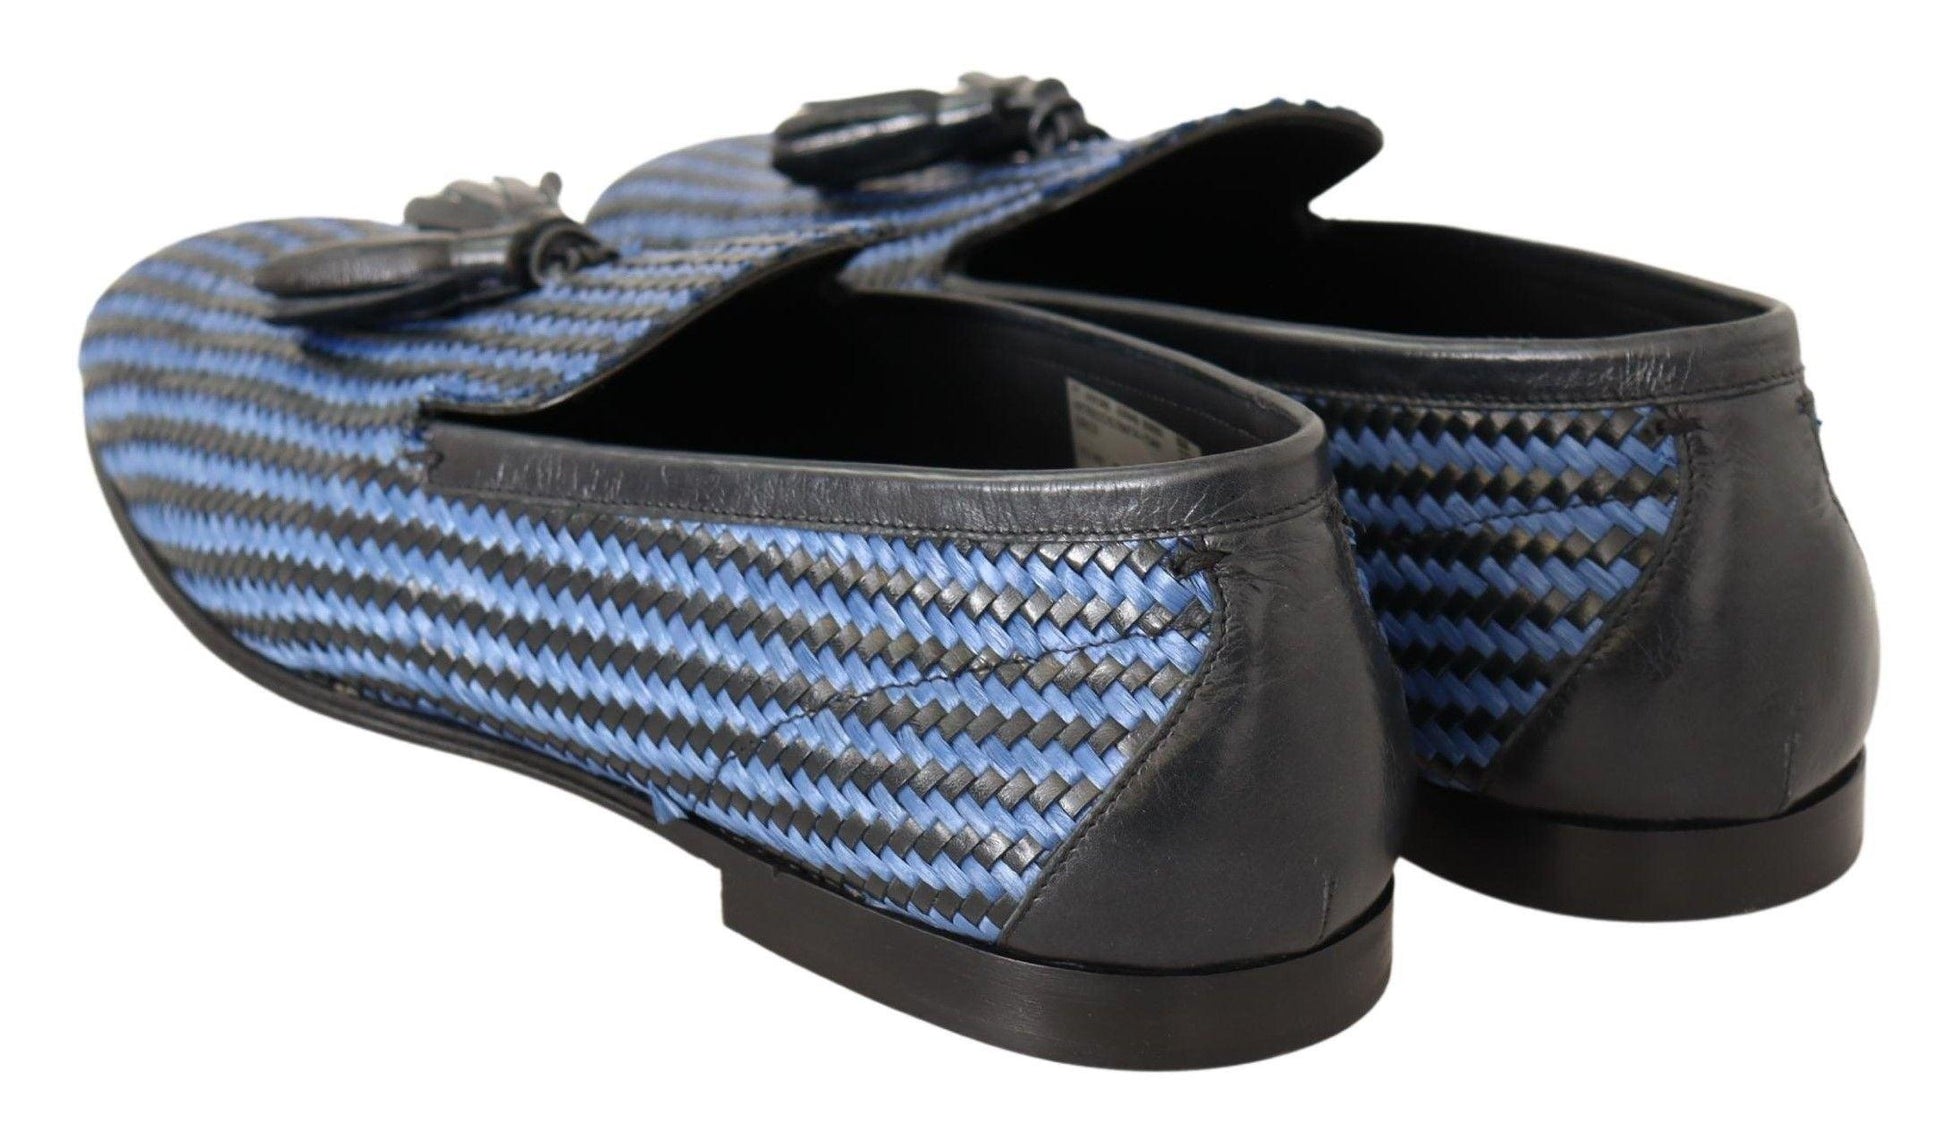 Blue Woven Leather Tassel Loafers Shoes - Designed by Dolce & Gabbana Available to Buy at a Discounted Price on Moon Behind The Hill Online Designer Discount Store